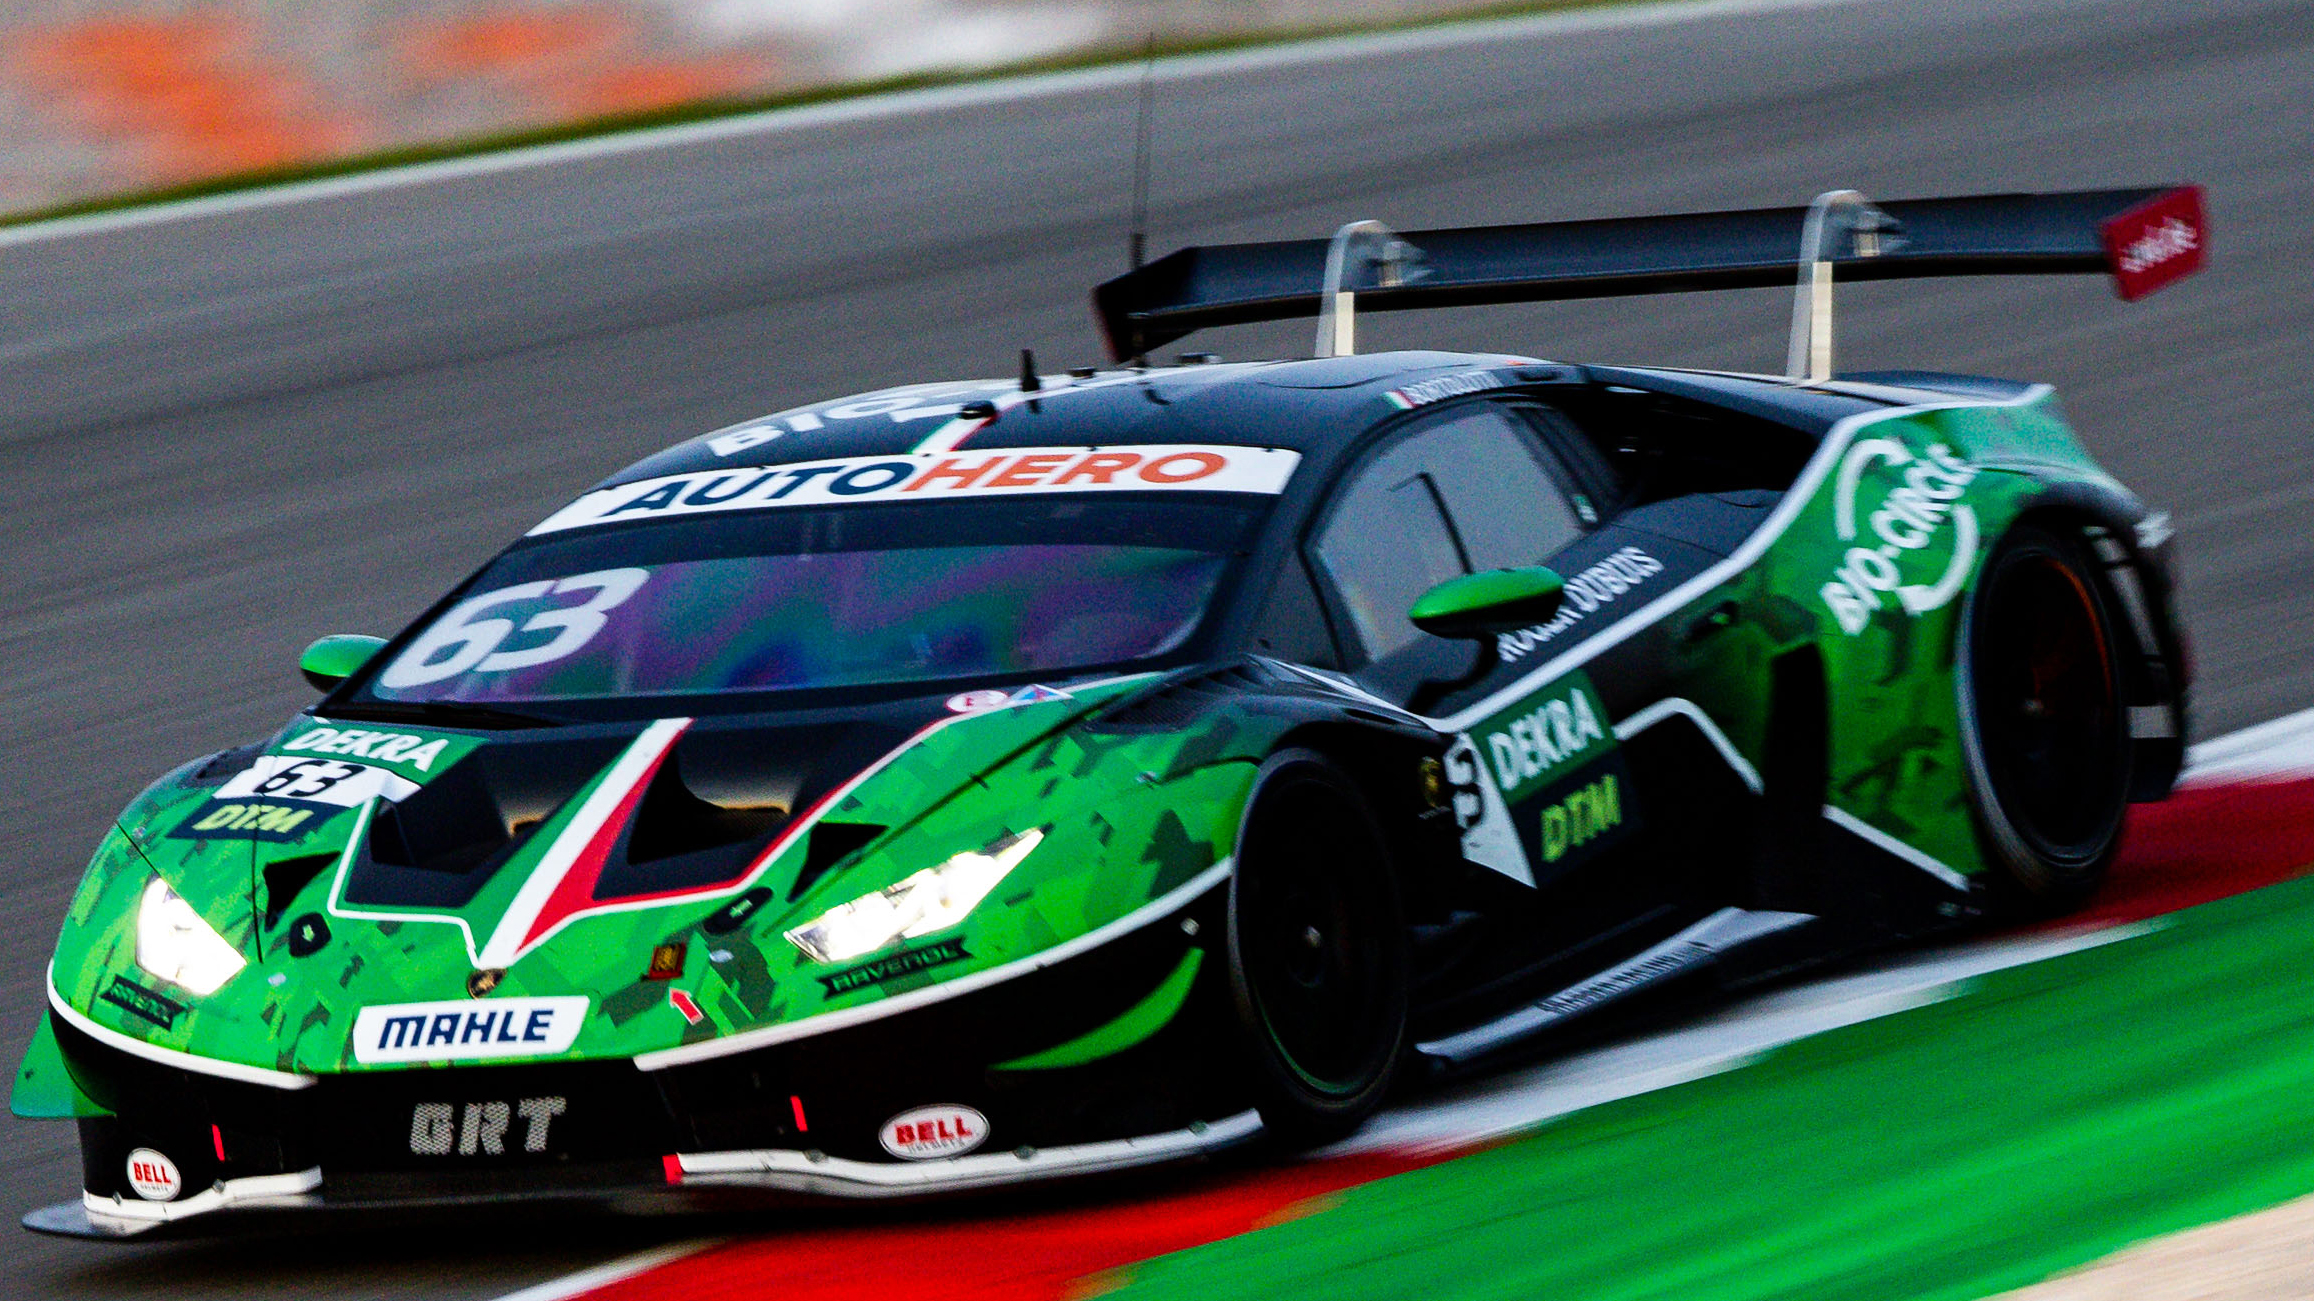 Grasser Racing Team (GRT) will enter the traditional series with no less than four Huracan GT3 Evos